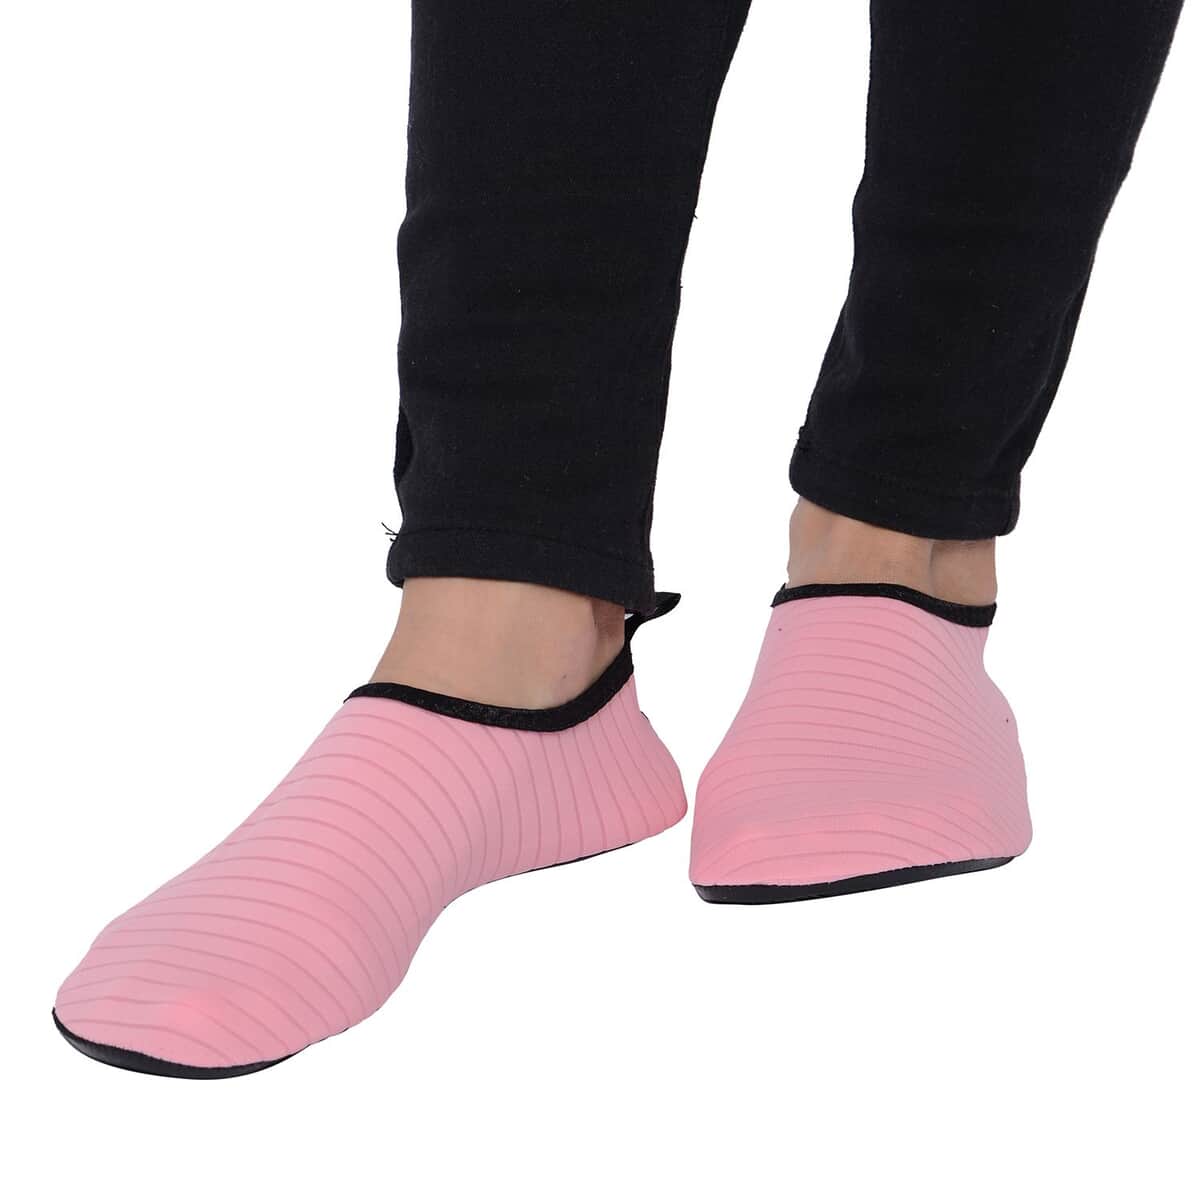 Pink Women's and Men's Water Shoes Barefoot Quick-Dry Aqua Socks image number 0